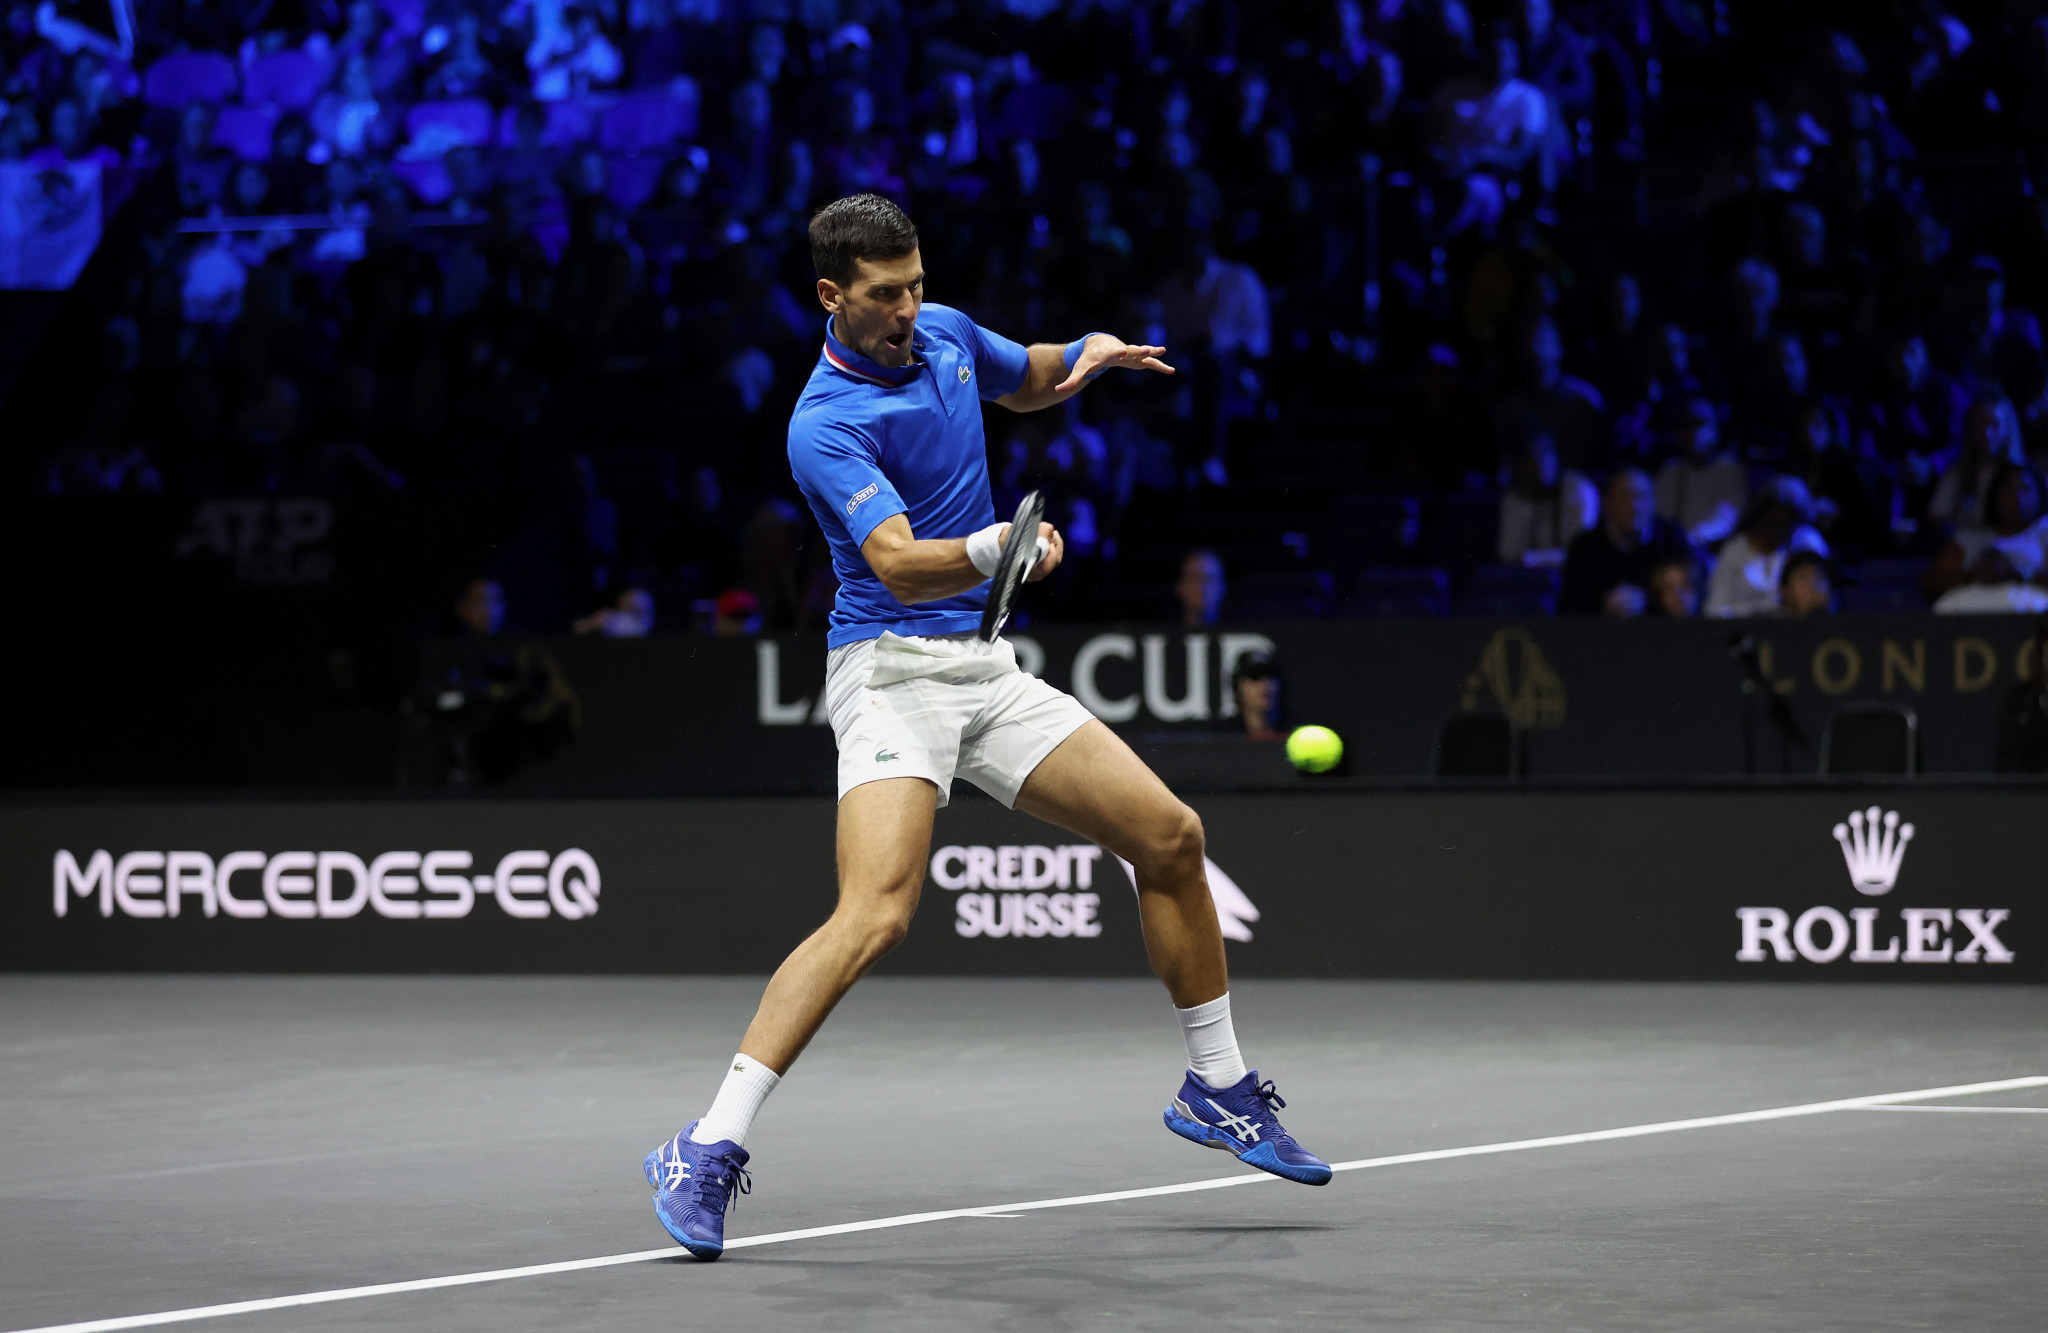 Novak Djokovic won in the singles on his return to the tennis court on day two of the Laver Cup ©Getty Images